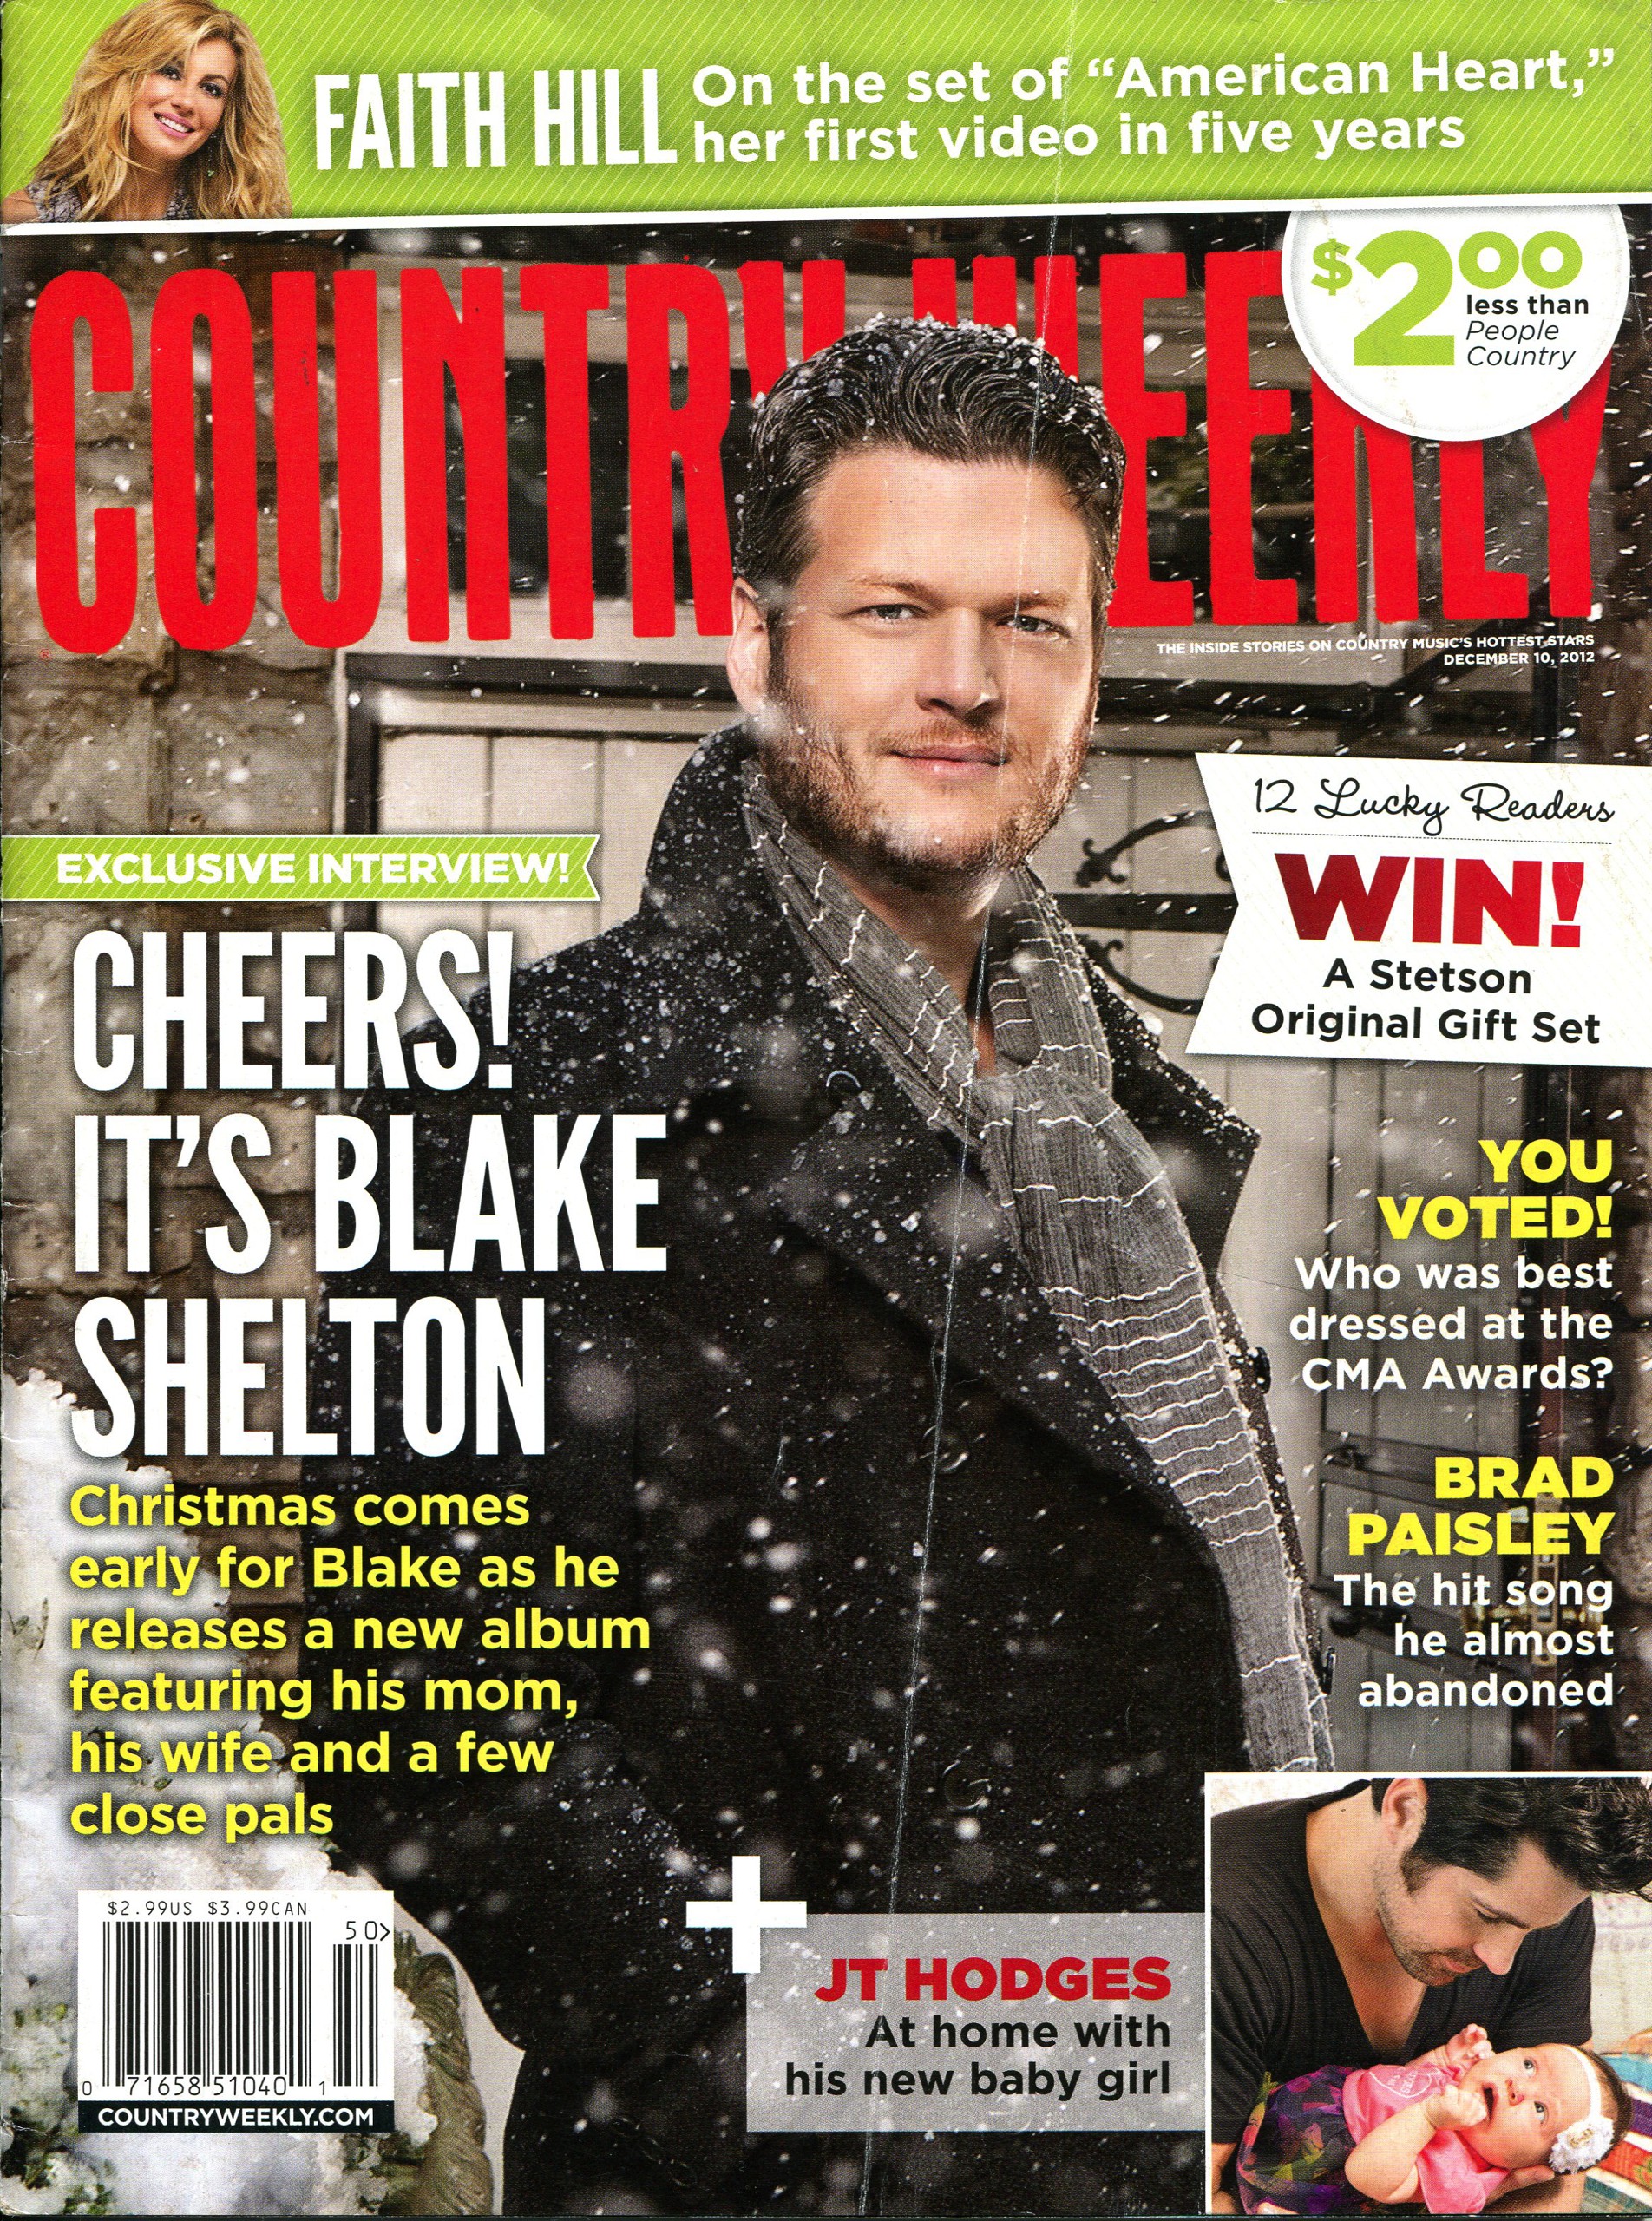 Country Weekly - Dec. 10th 2012